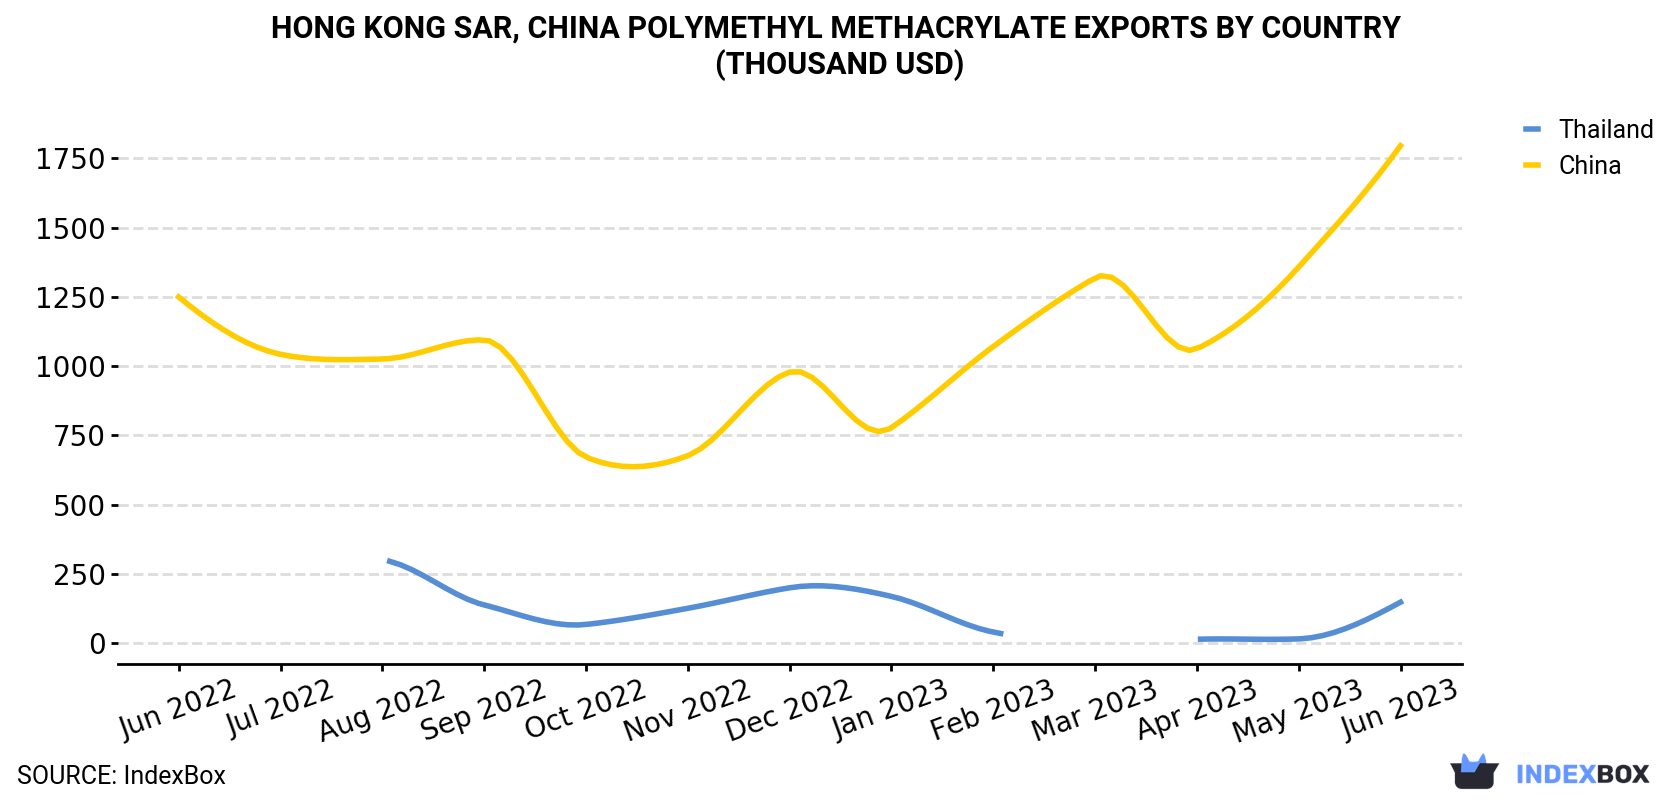 Hong Kong Polymethyl Methacrylate Exports By Country (Thousand USD)